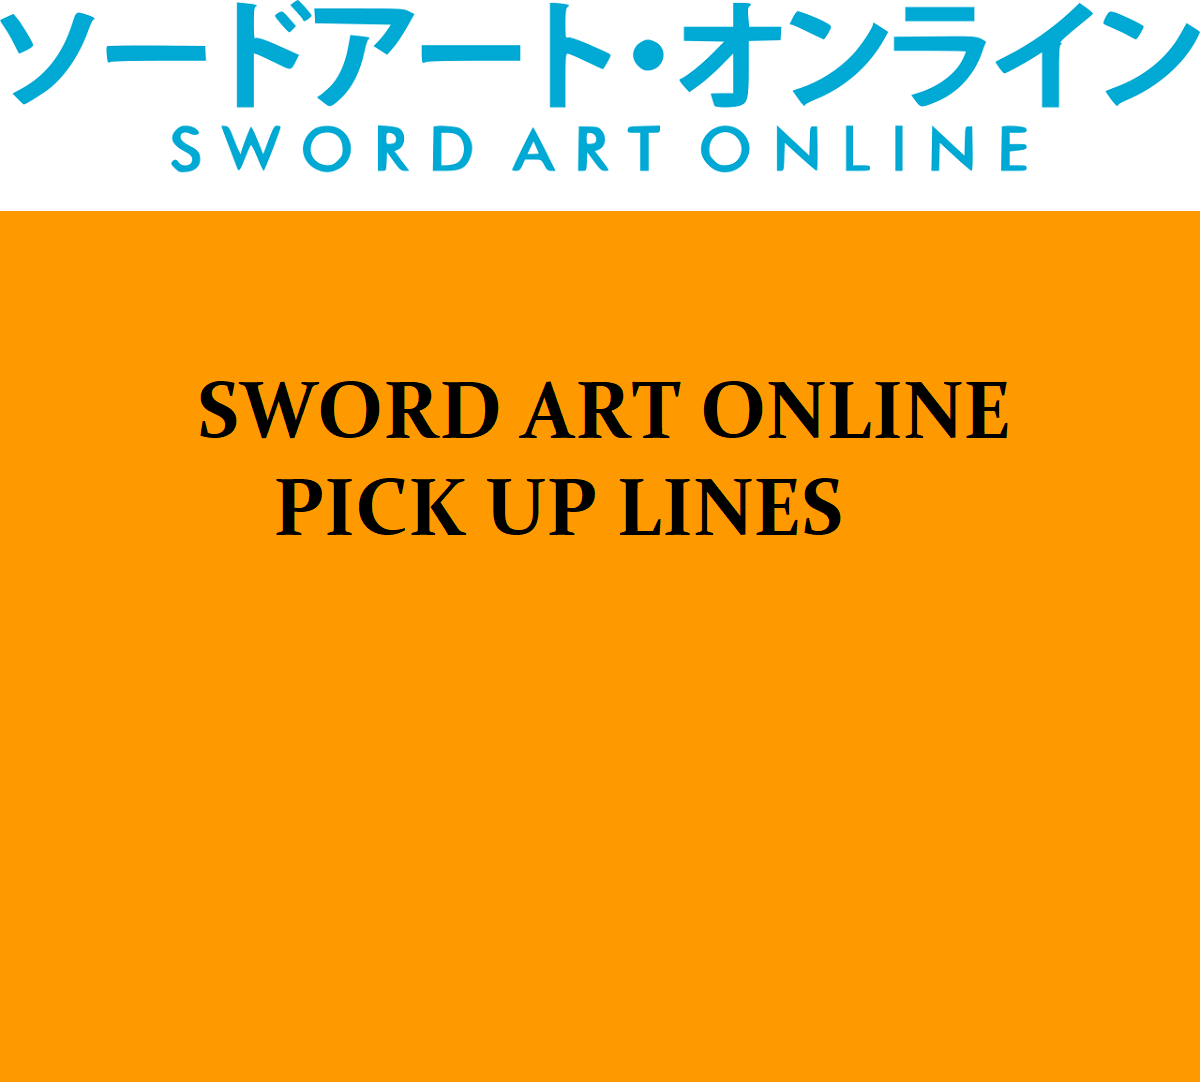 Pick Up Lines About Sword Art Online